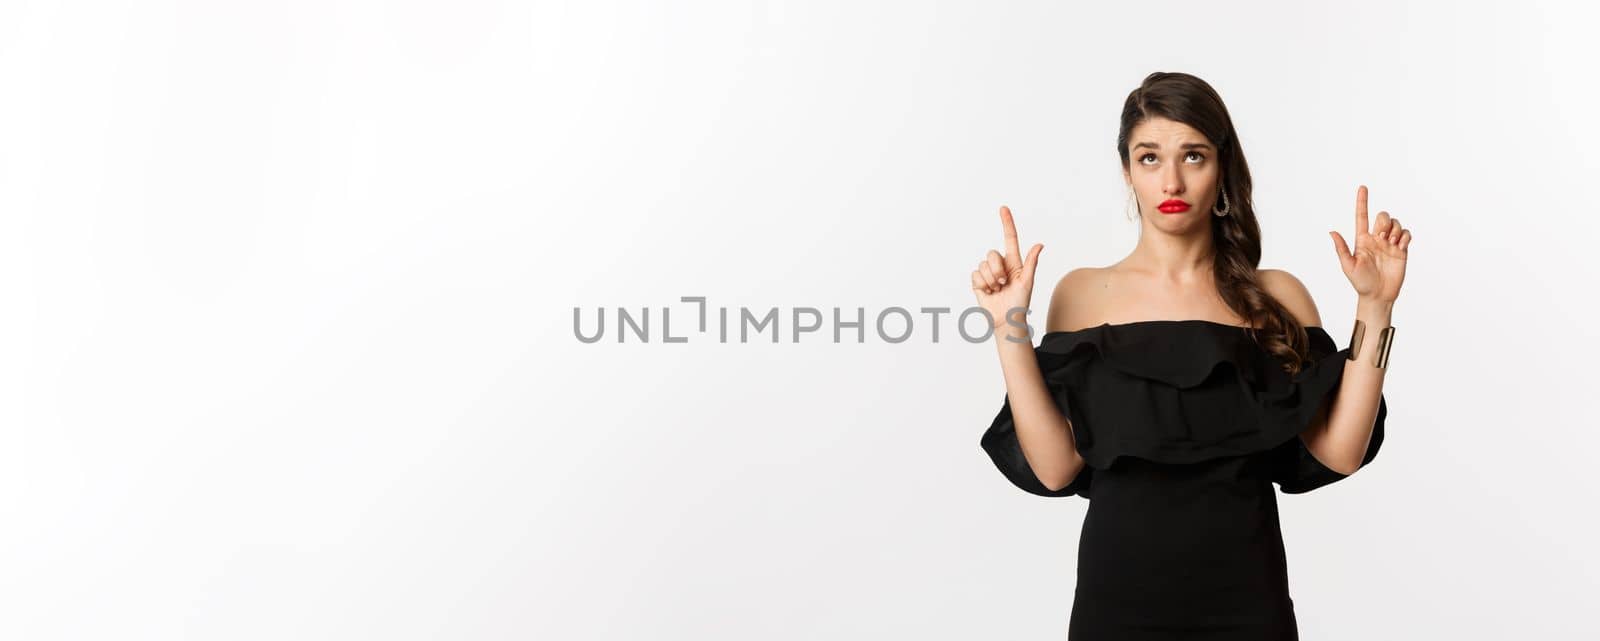 Fashion and beauty. Silly woman in black dress, red lips, looking and pointing fingers up with unamused doubtful expression, white background.